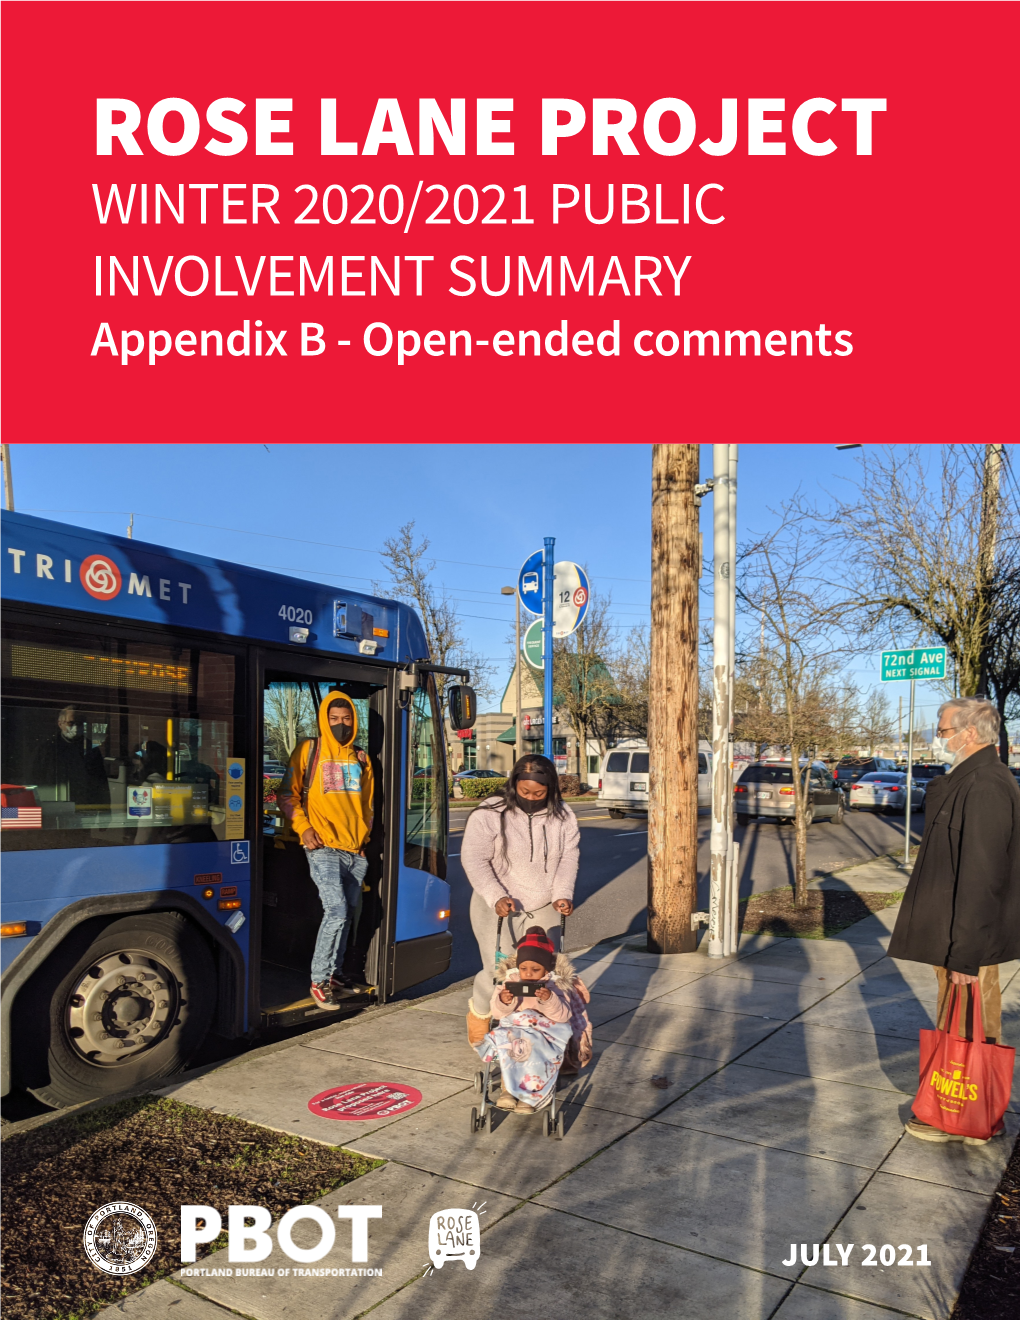 ROSE LANE PROJECT WINTER 2020/2021 PUBLIC INVOLVEMENT SUMMARY Appendix B - Open-Ended Comments